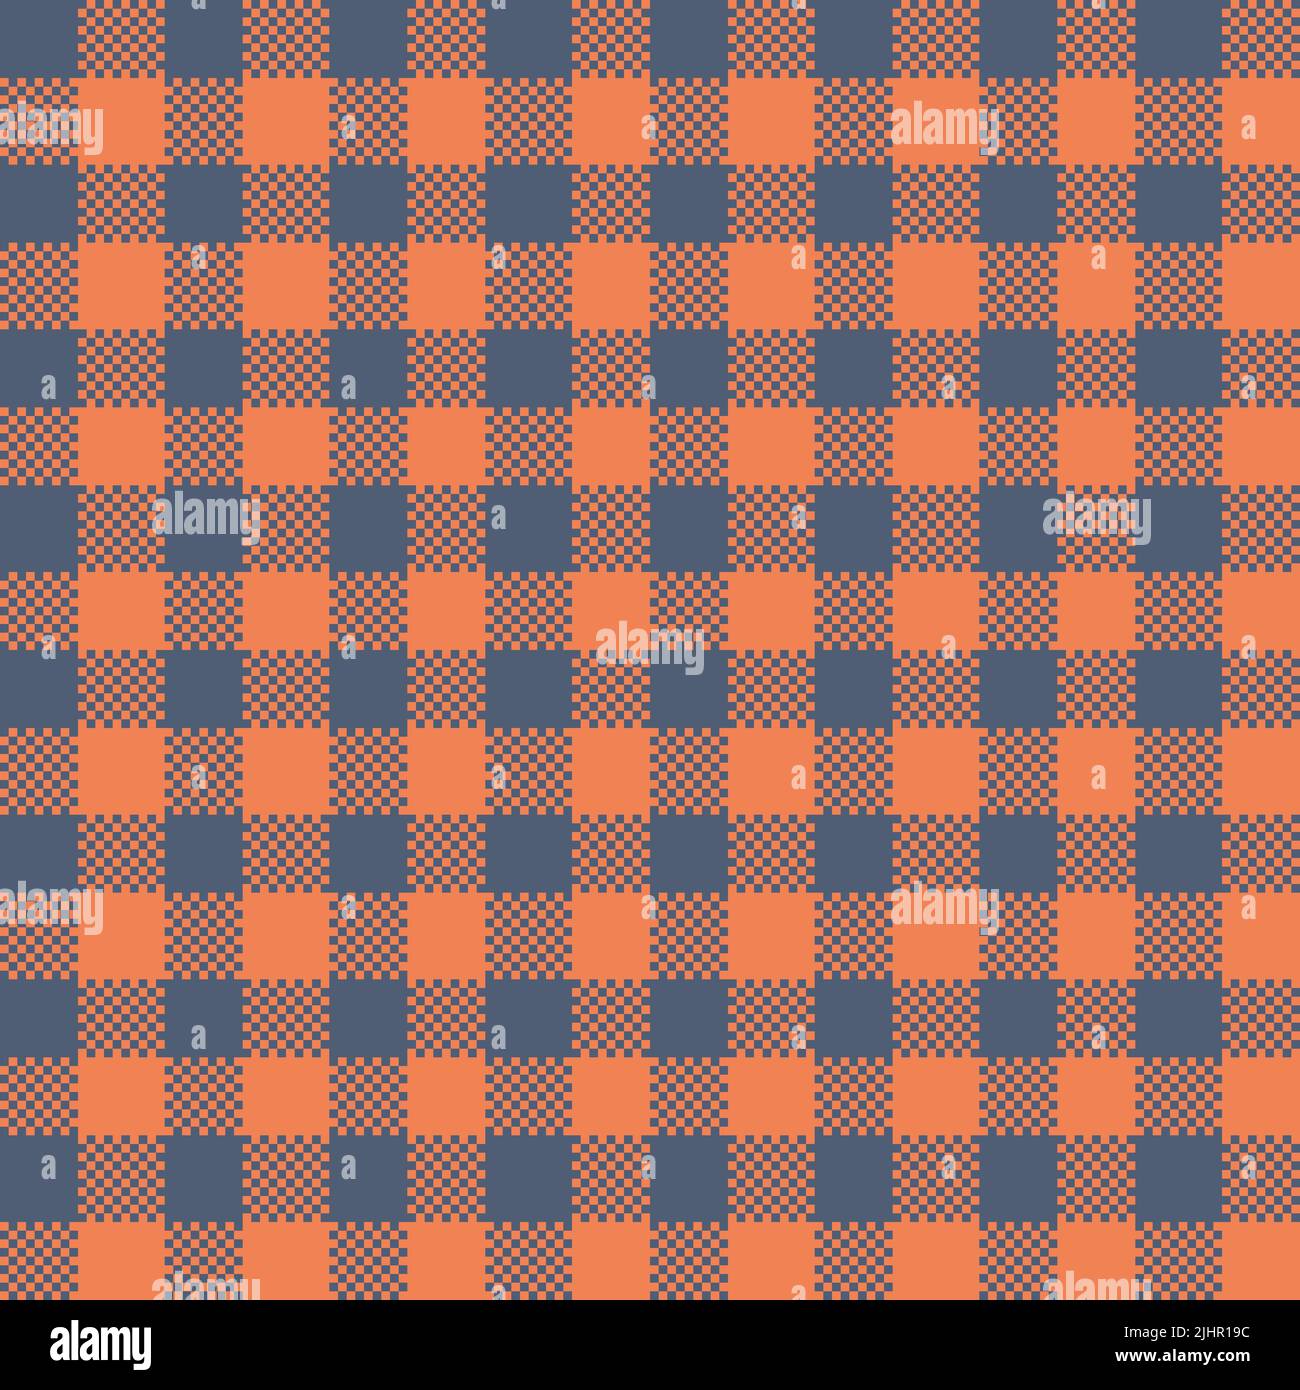 photography plaid Coral background pattern Alamy hi-res - and images stock